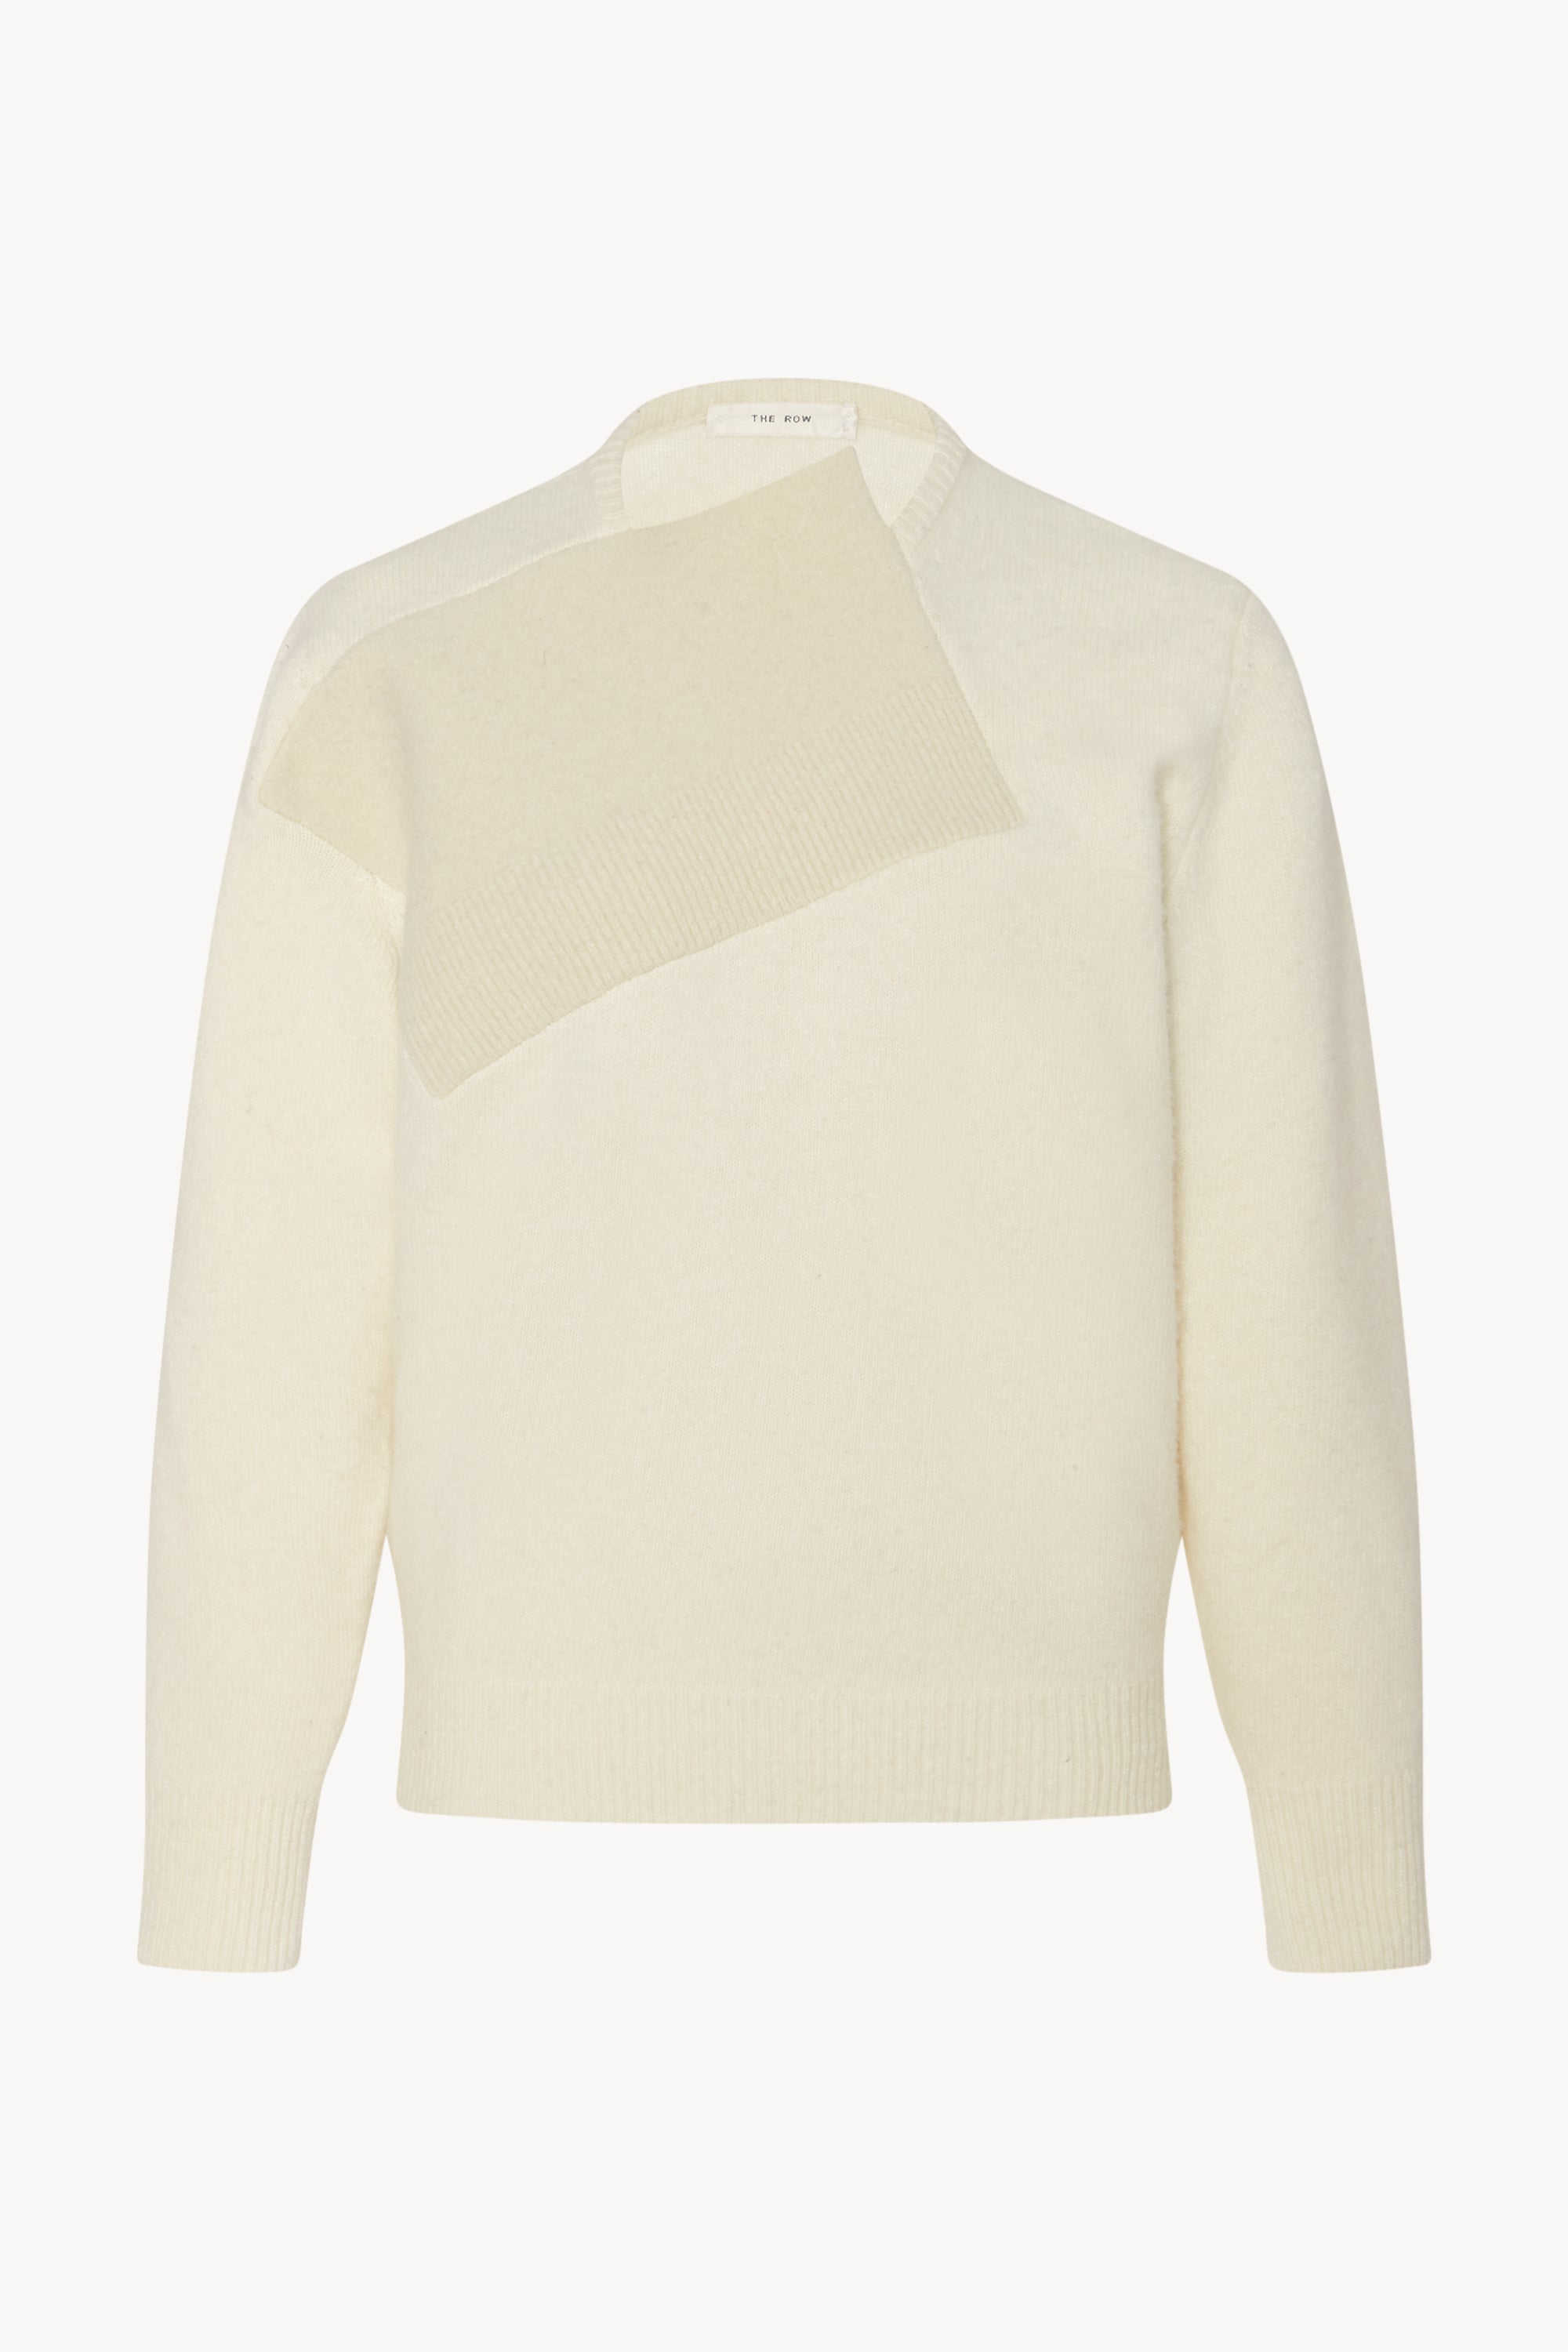 Enid Top White in Merino Wool and Cashmere – The Row